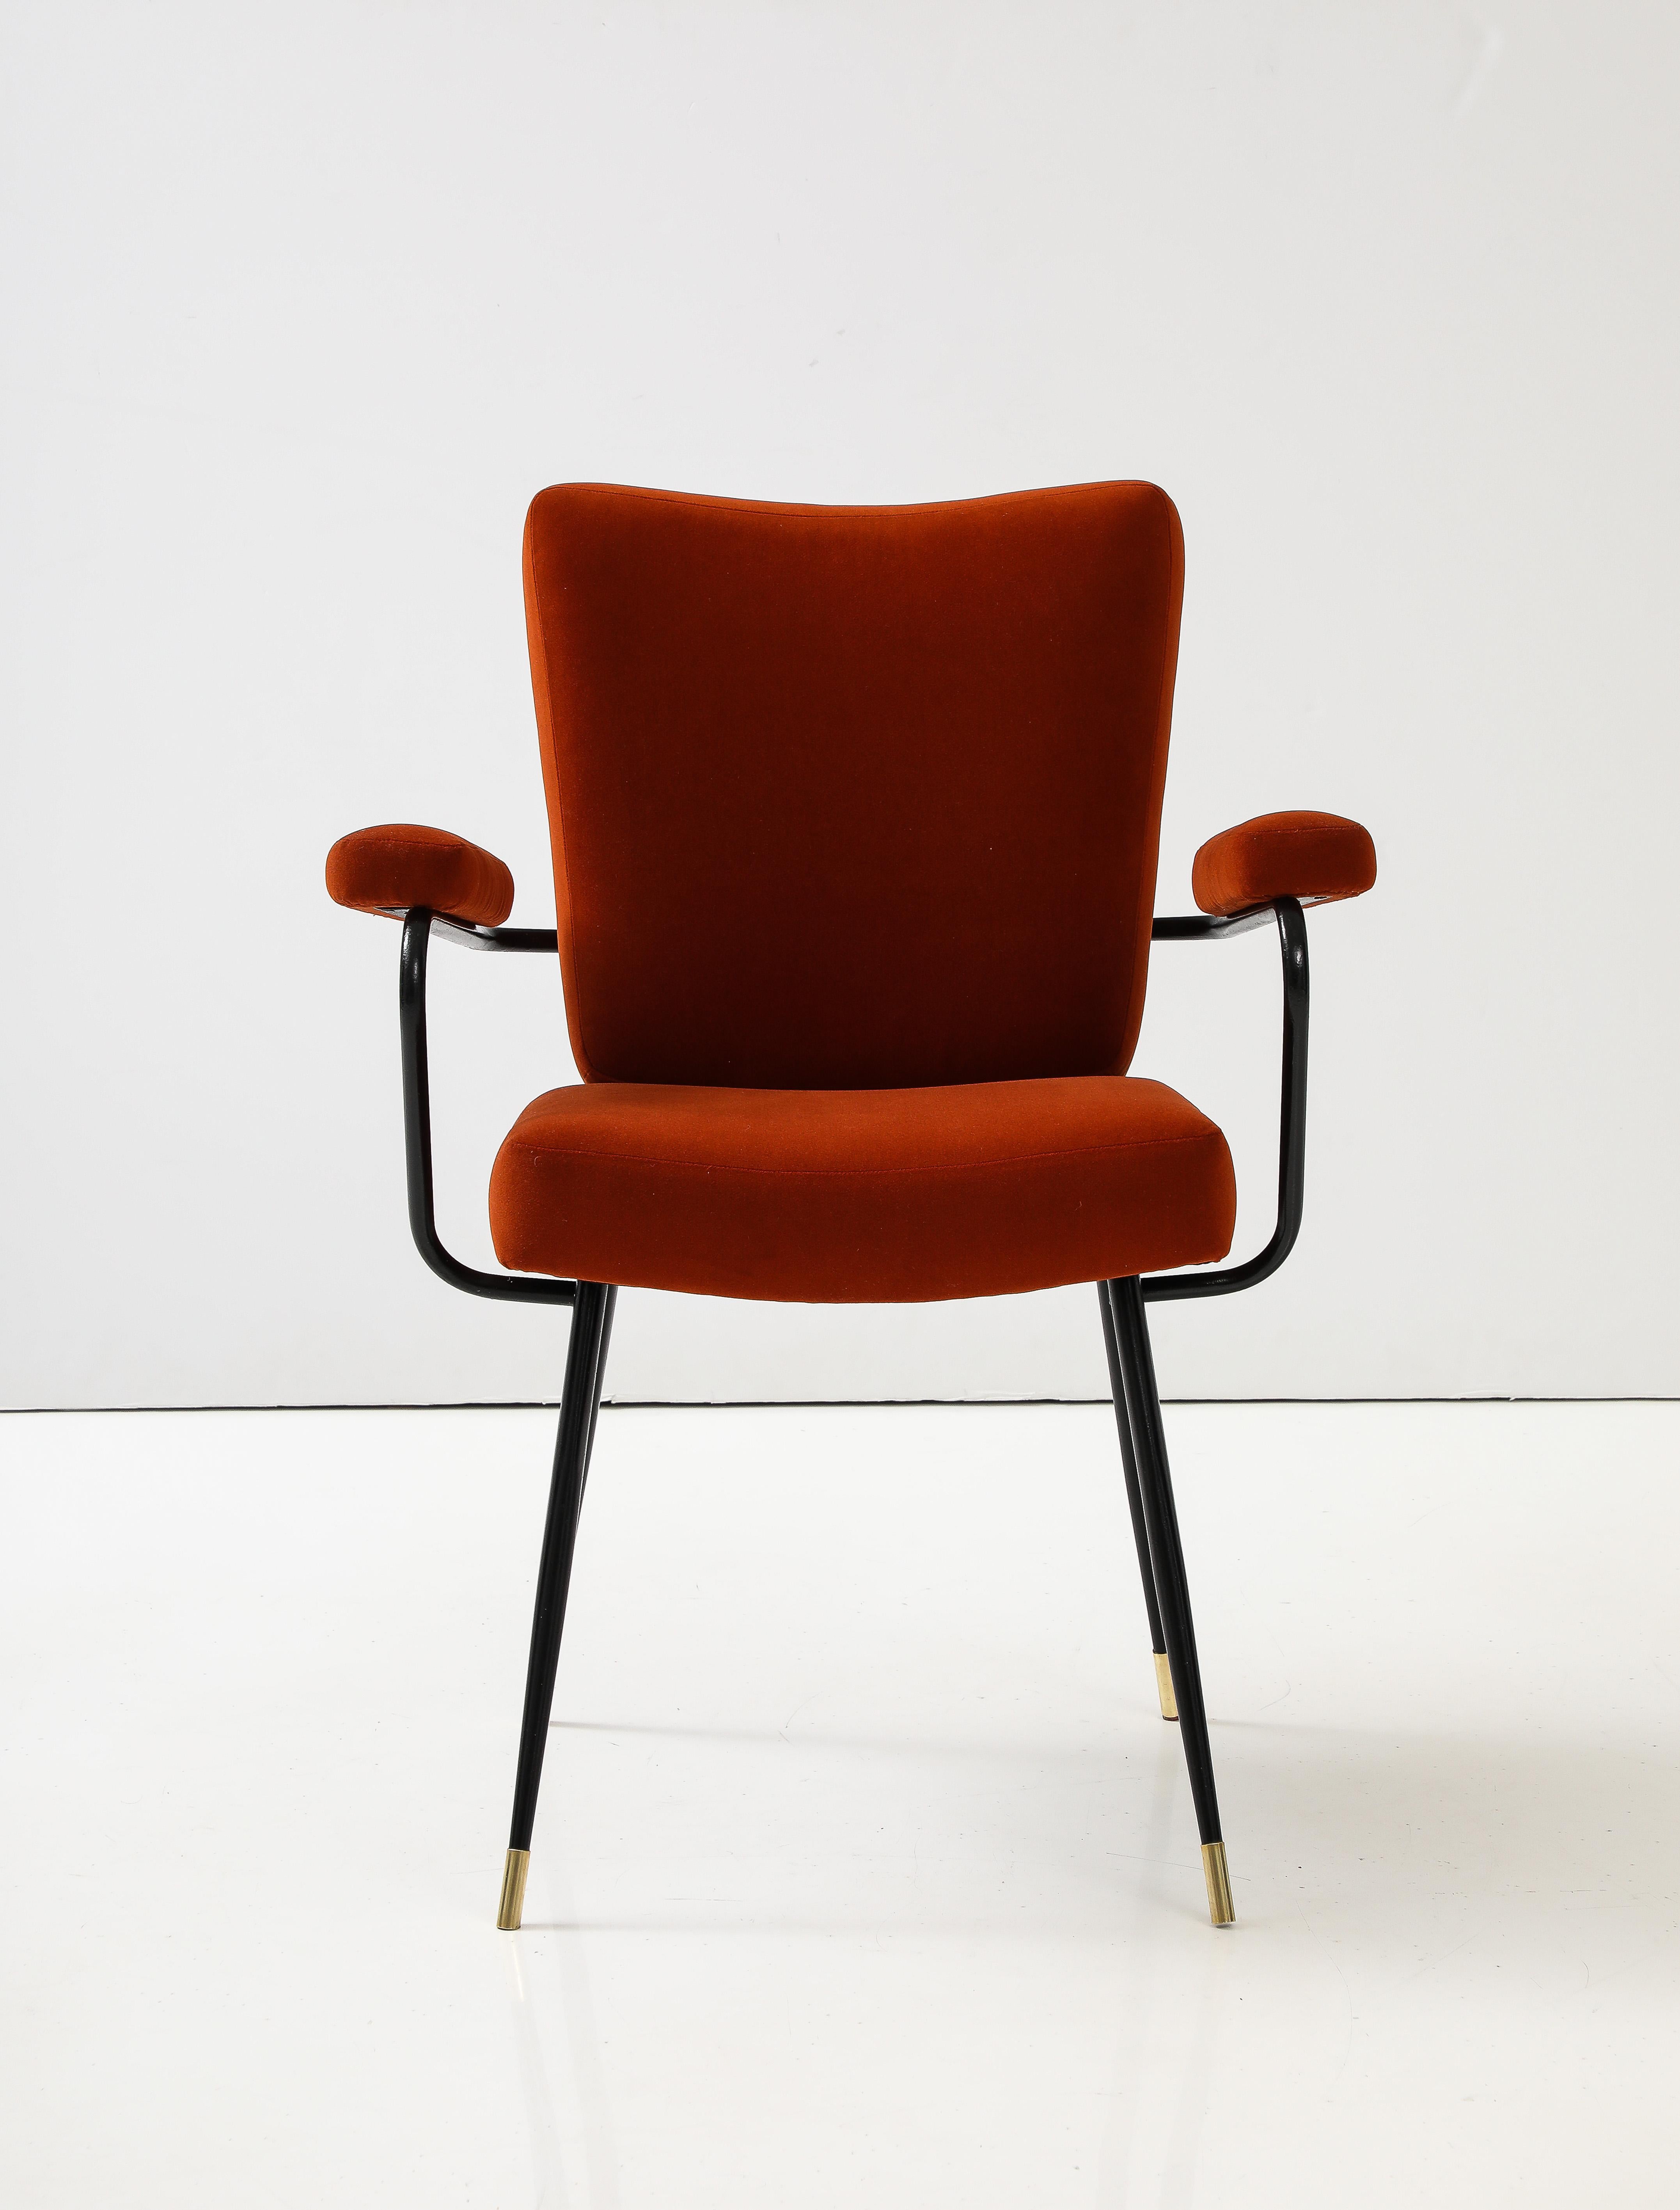 Gastone Rinaldi armchair, designed for Rima, circa 1955. 
This Italian postwar armchair has a sculptural appearance due to the well-constructed tubular frame in lacquered metal; simply designed with clean and fluent lines. The tapered, sleek legs